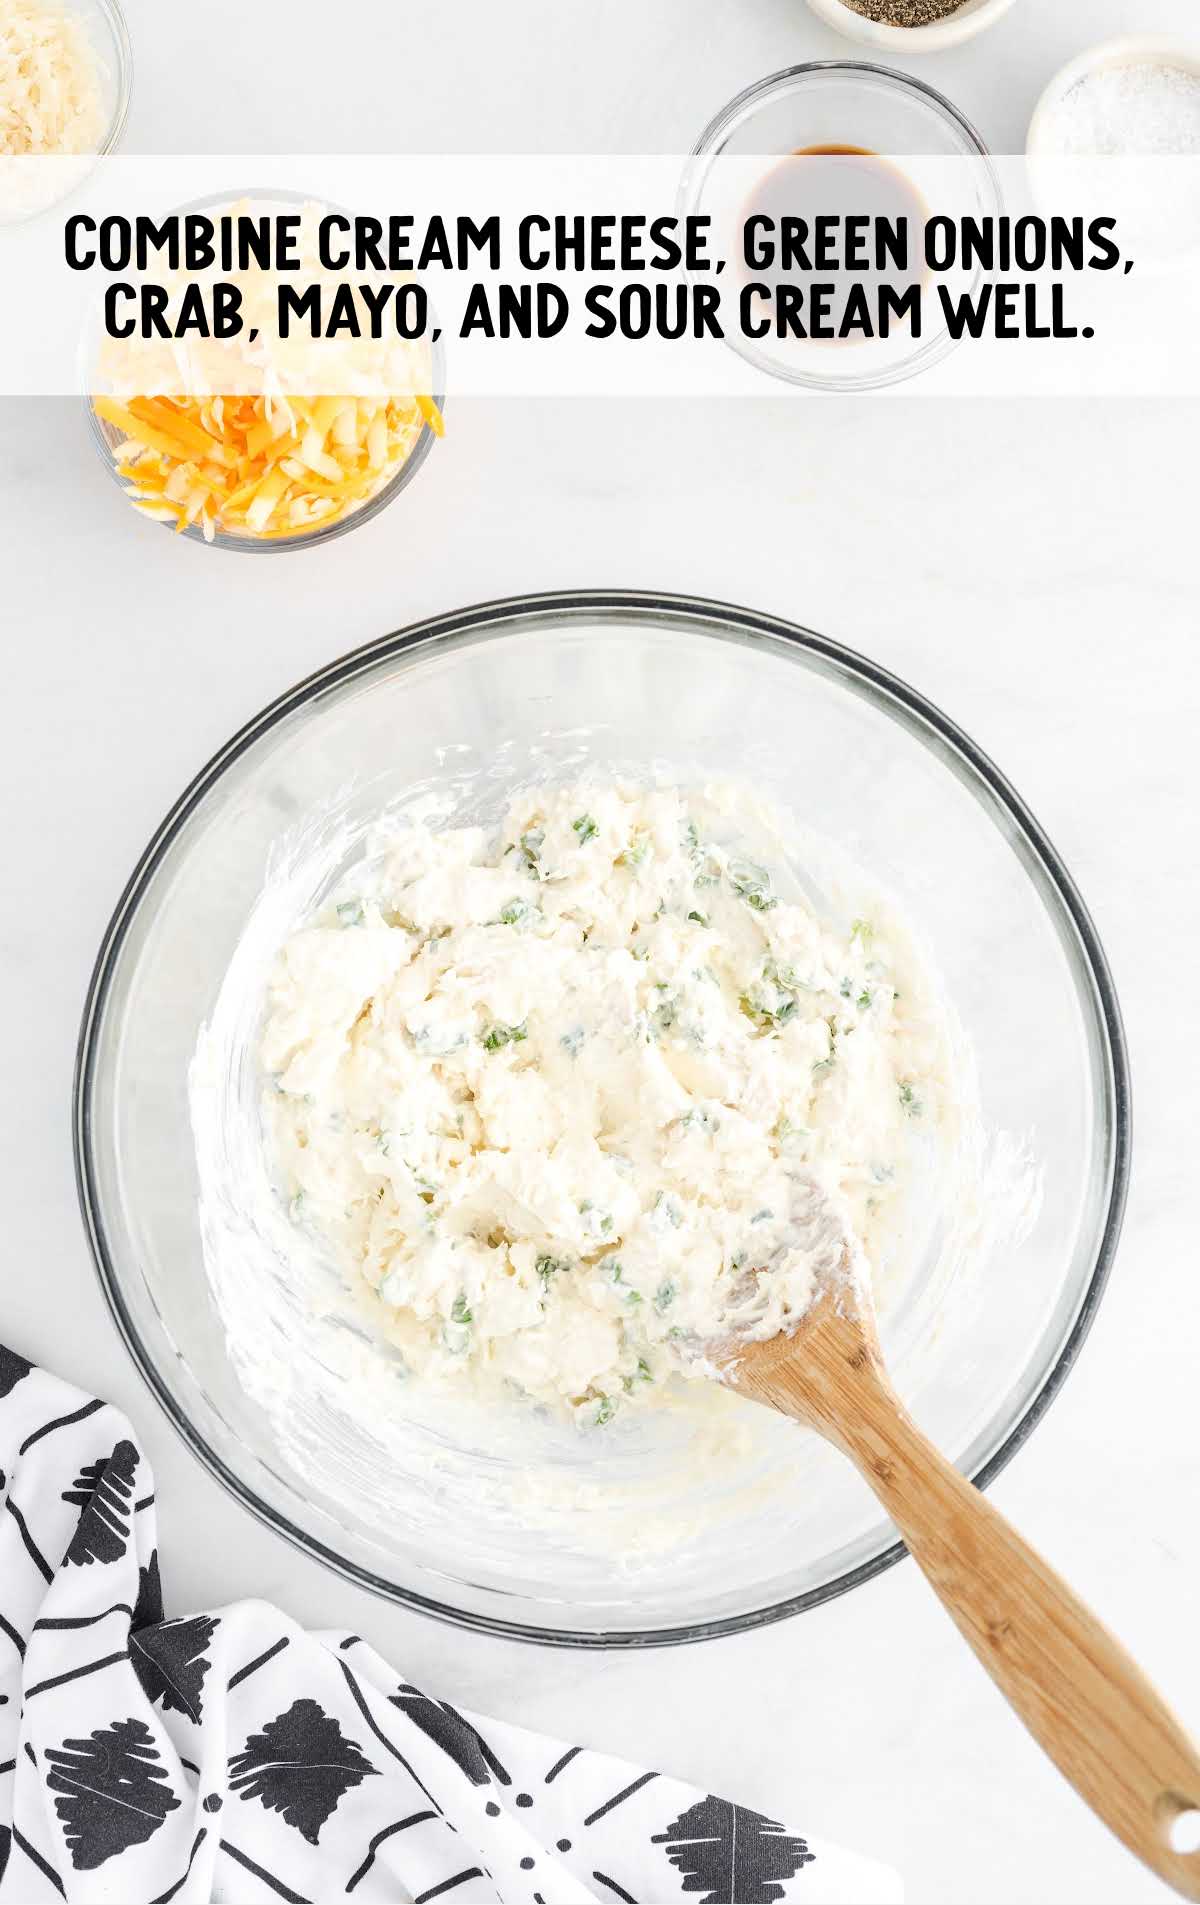 cream cheese, green onions, crab, mayo, and sour cream combined